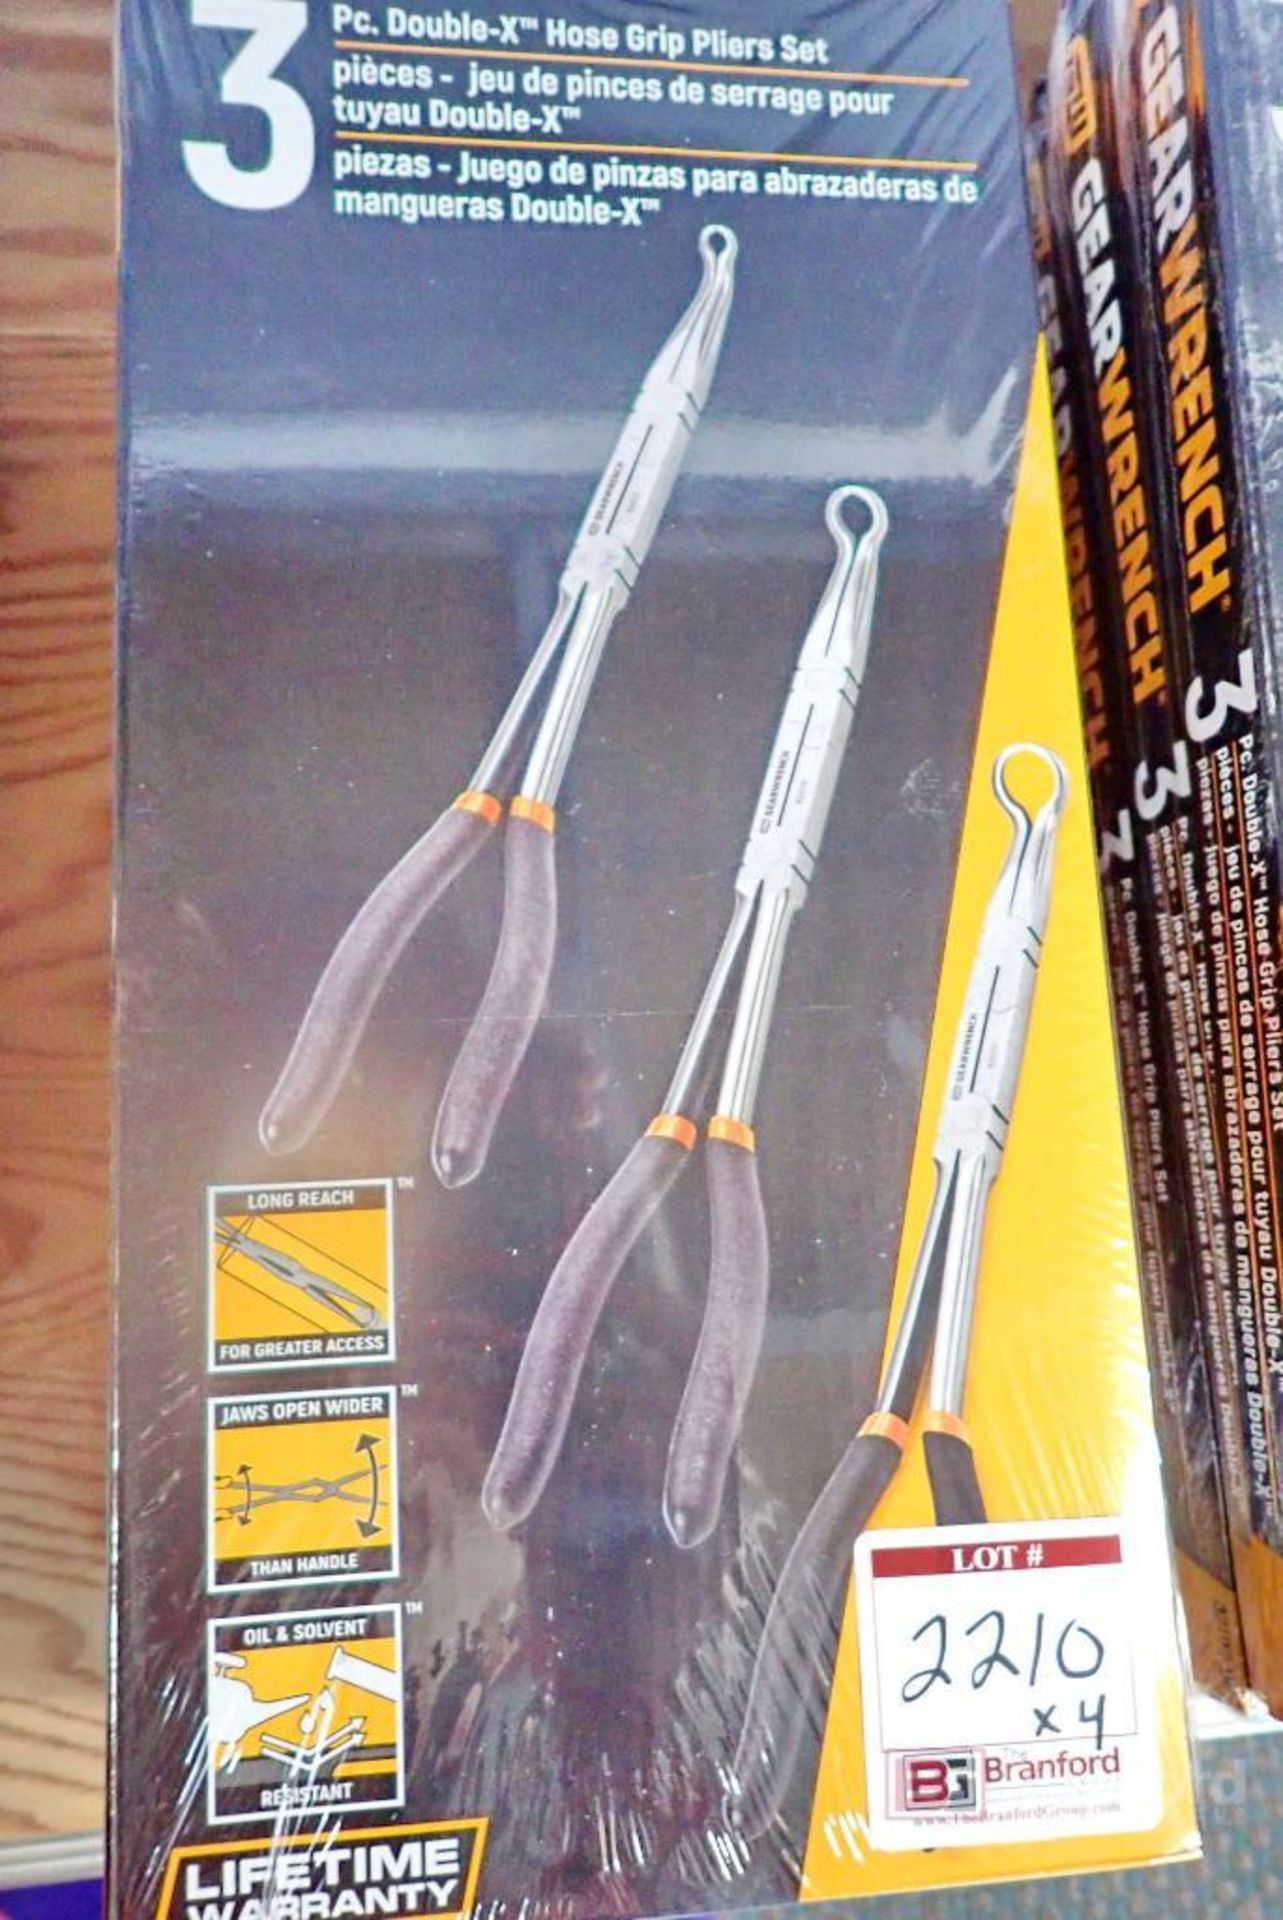 (4) GearWrench 82107-06 3Pc. Double-X Hose Grip Pliers Sets - Image 3 of 6